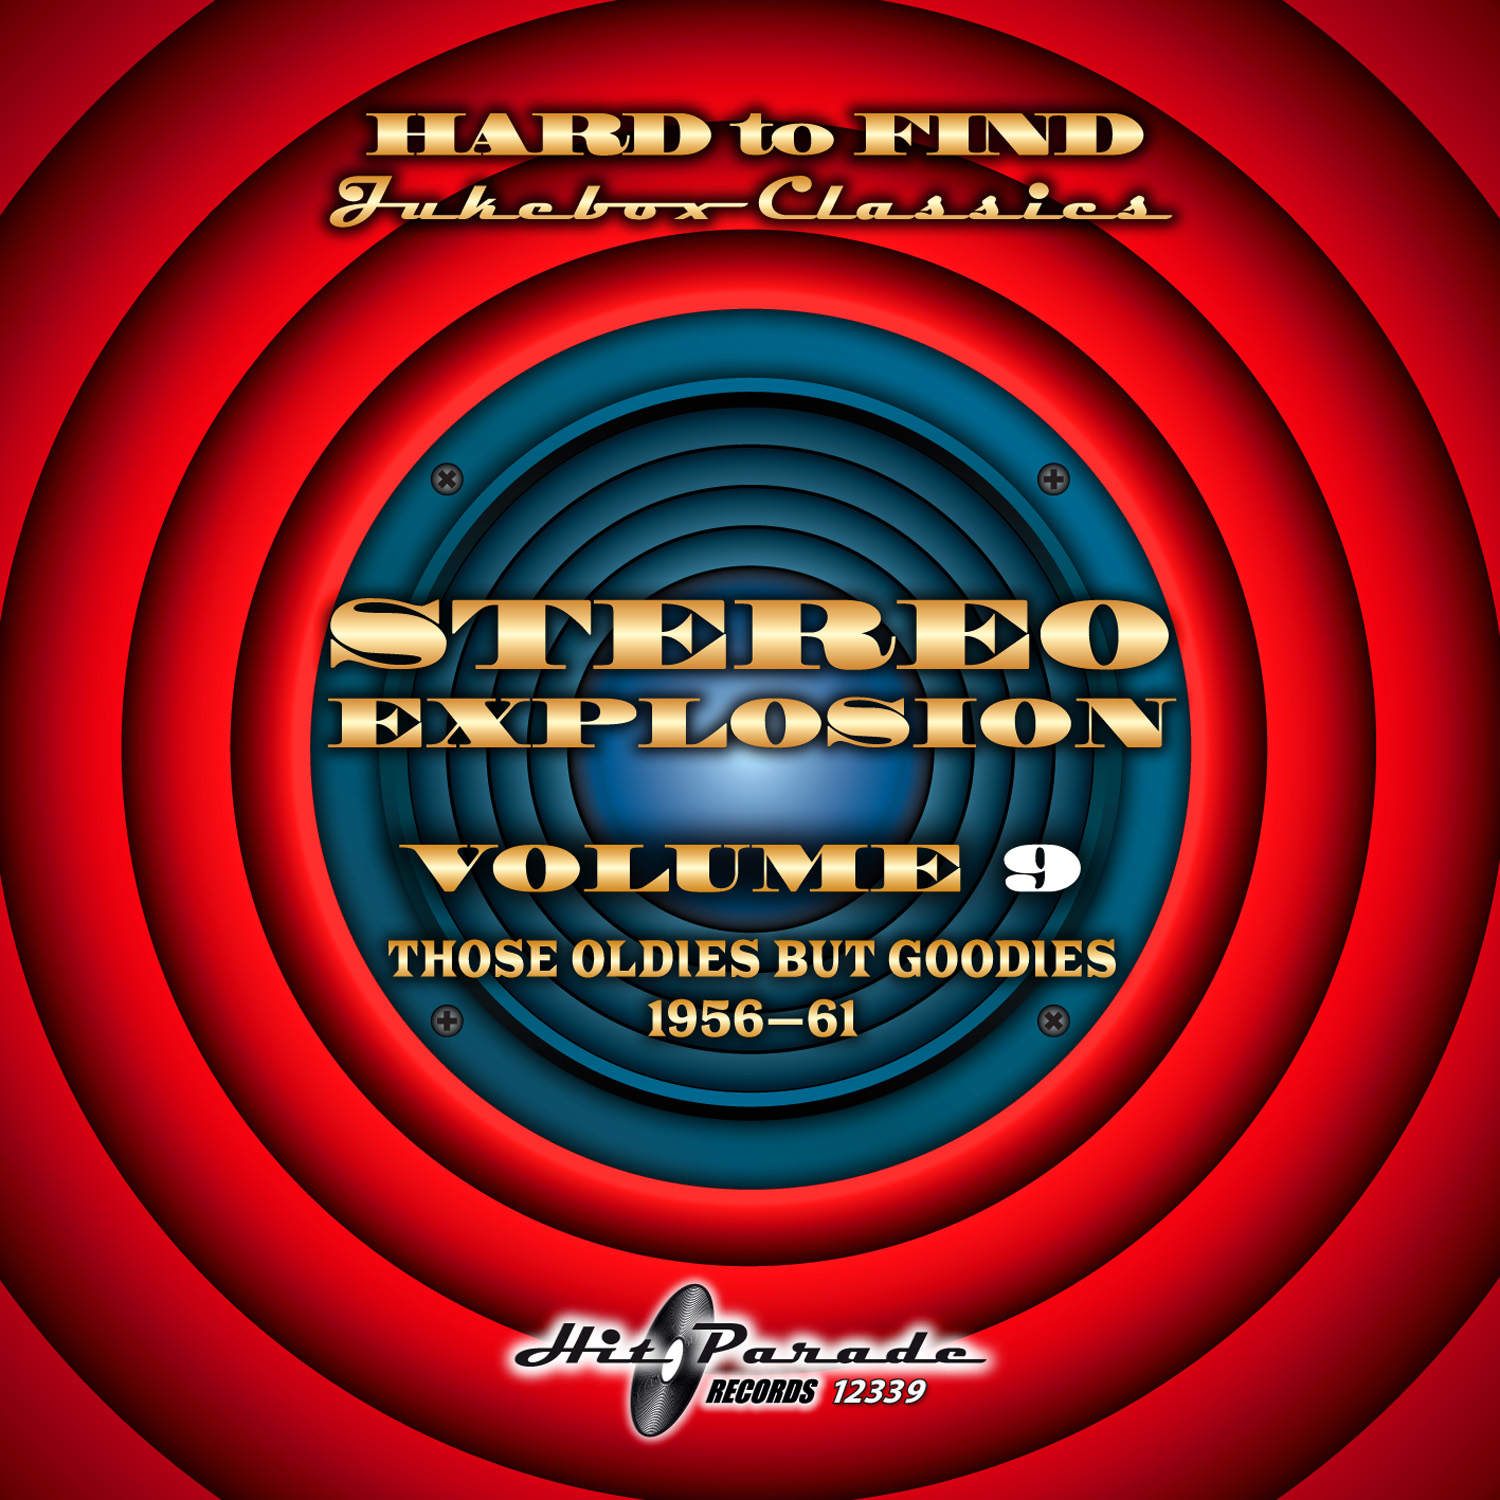 Hard to Find Jukebox Classics -
                  Stereo Explosion Volume 9:<br>Those Oldies But Goodies, 1956-61